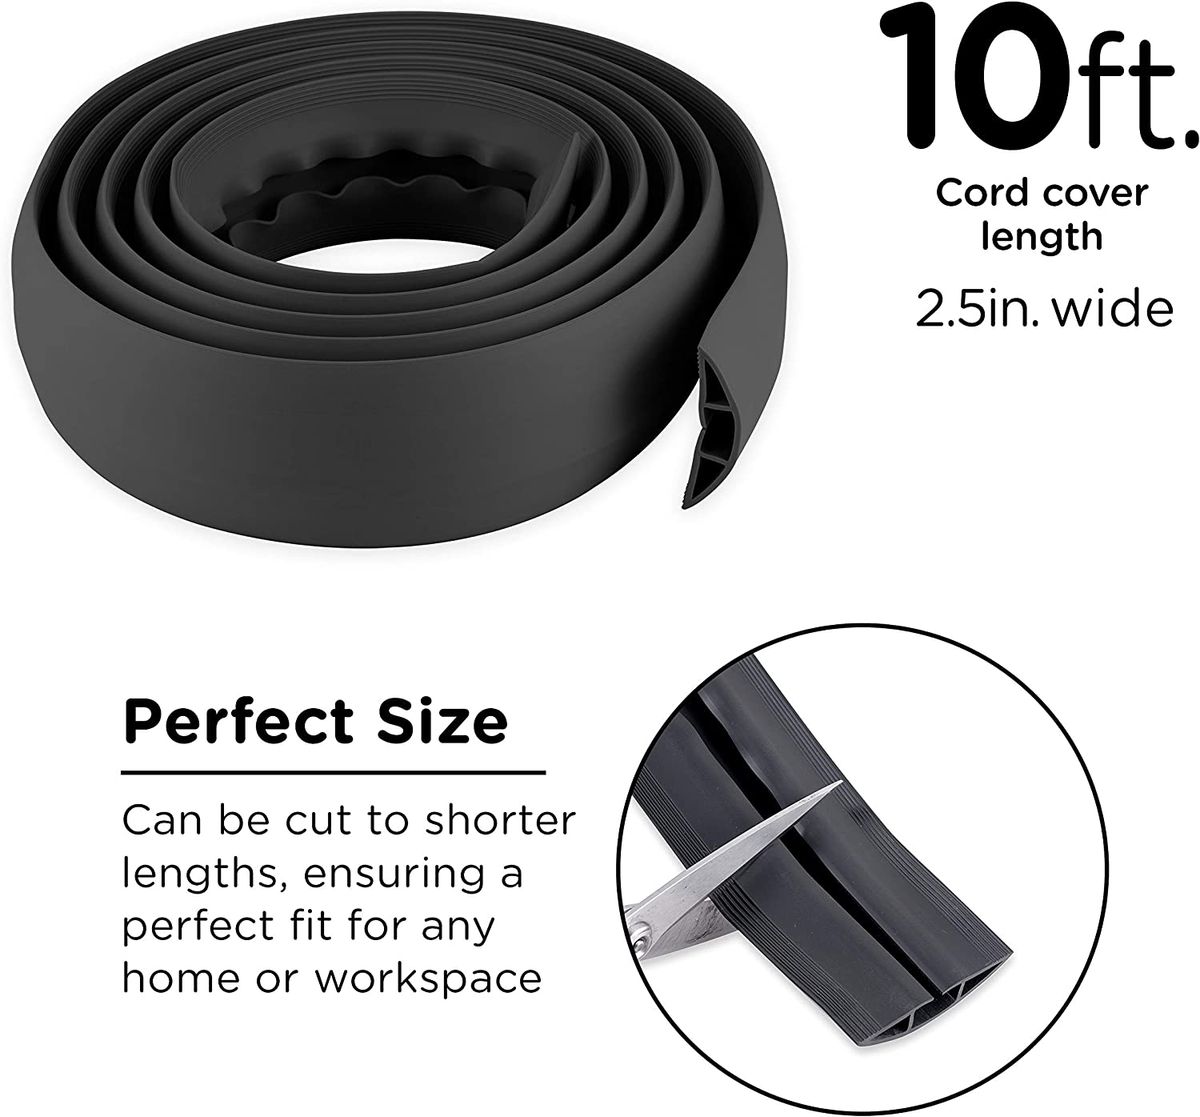 Cordinate 10 Ft Floor Cord Cover, Rubber, Low Profile, Cable Protector,  Gray, 49627 